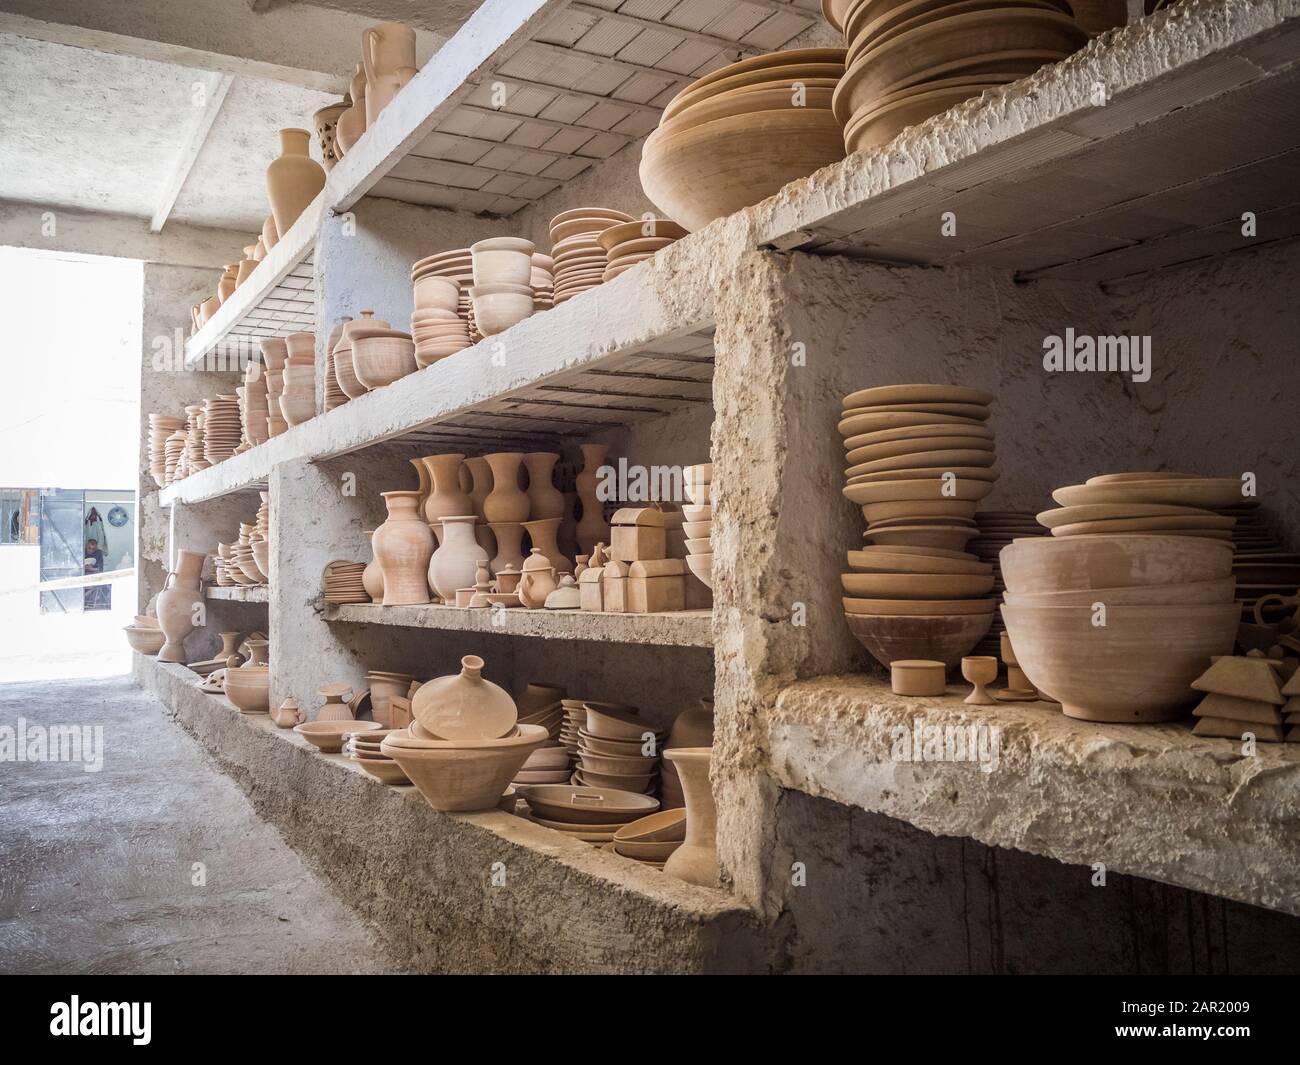 Lot of different kinds of clay pottery in Morocco, North Africa Stock Photo